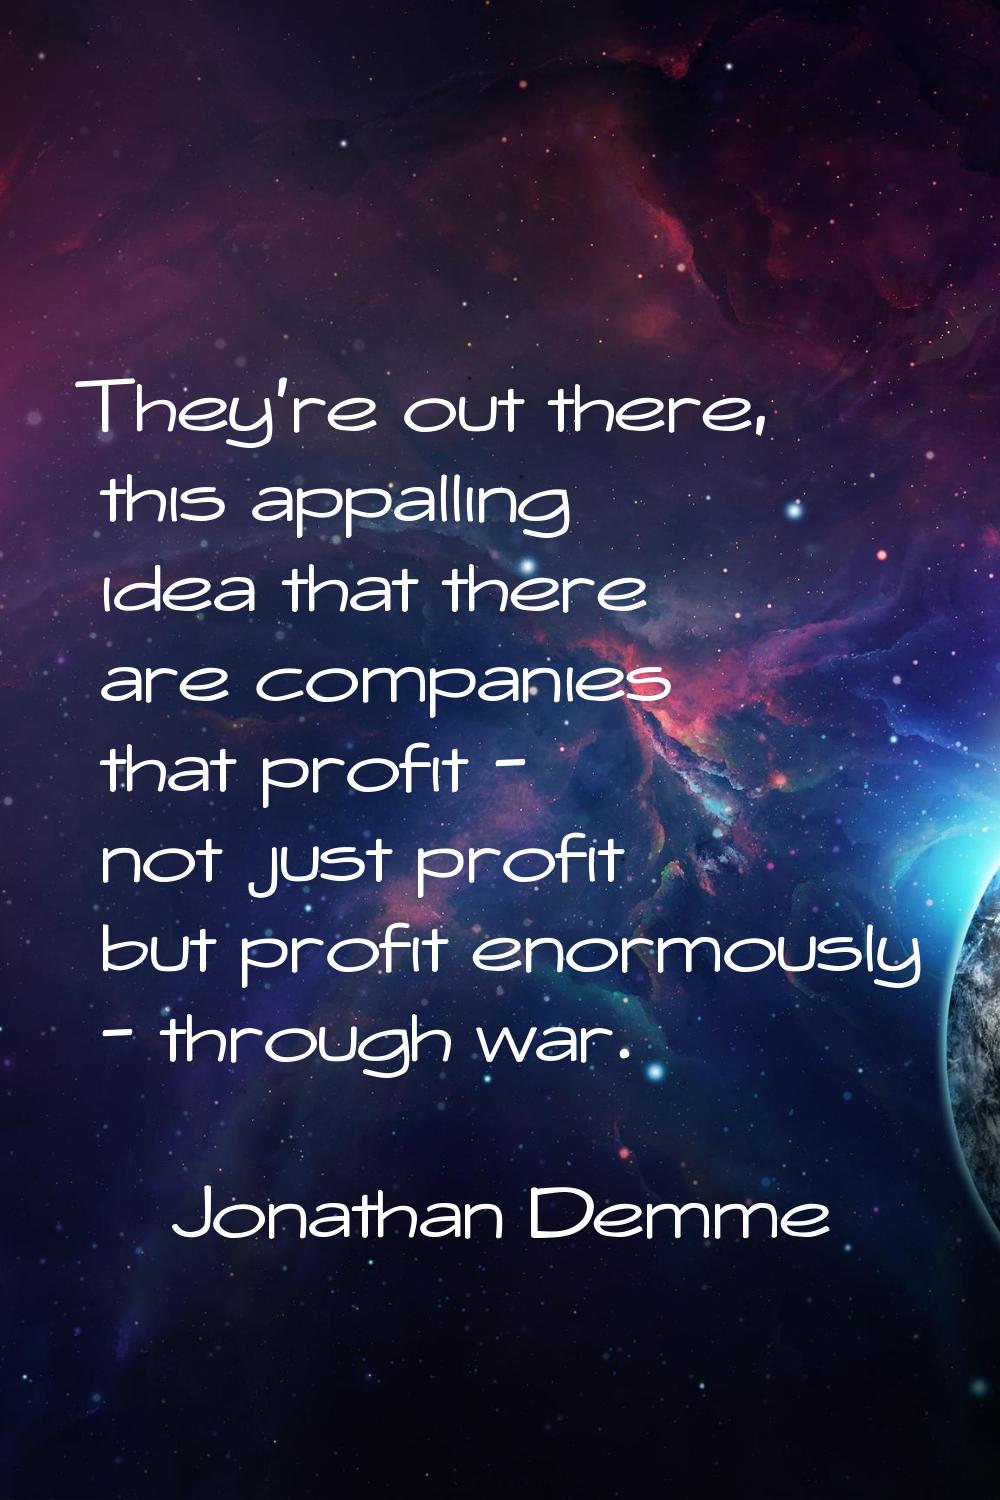 They're out there, this appalling idea that there are companies that profit - not just profit but p